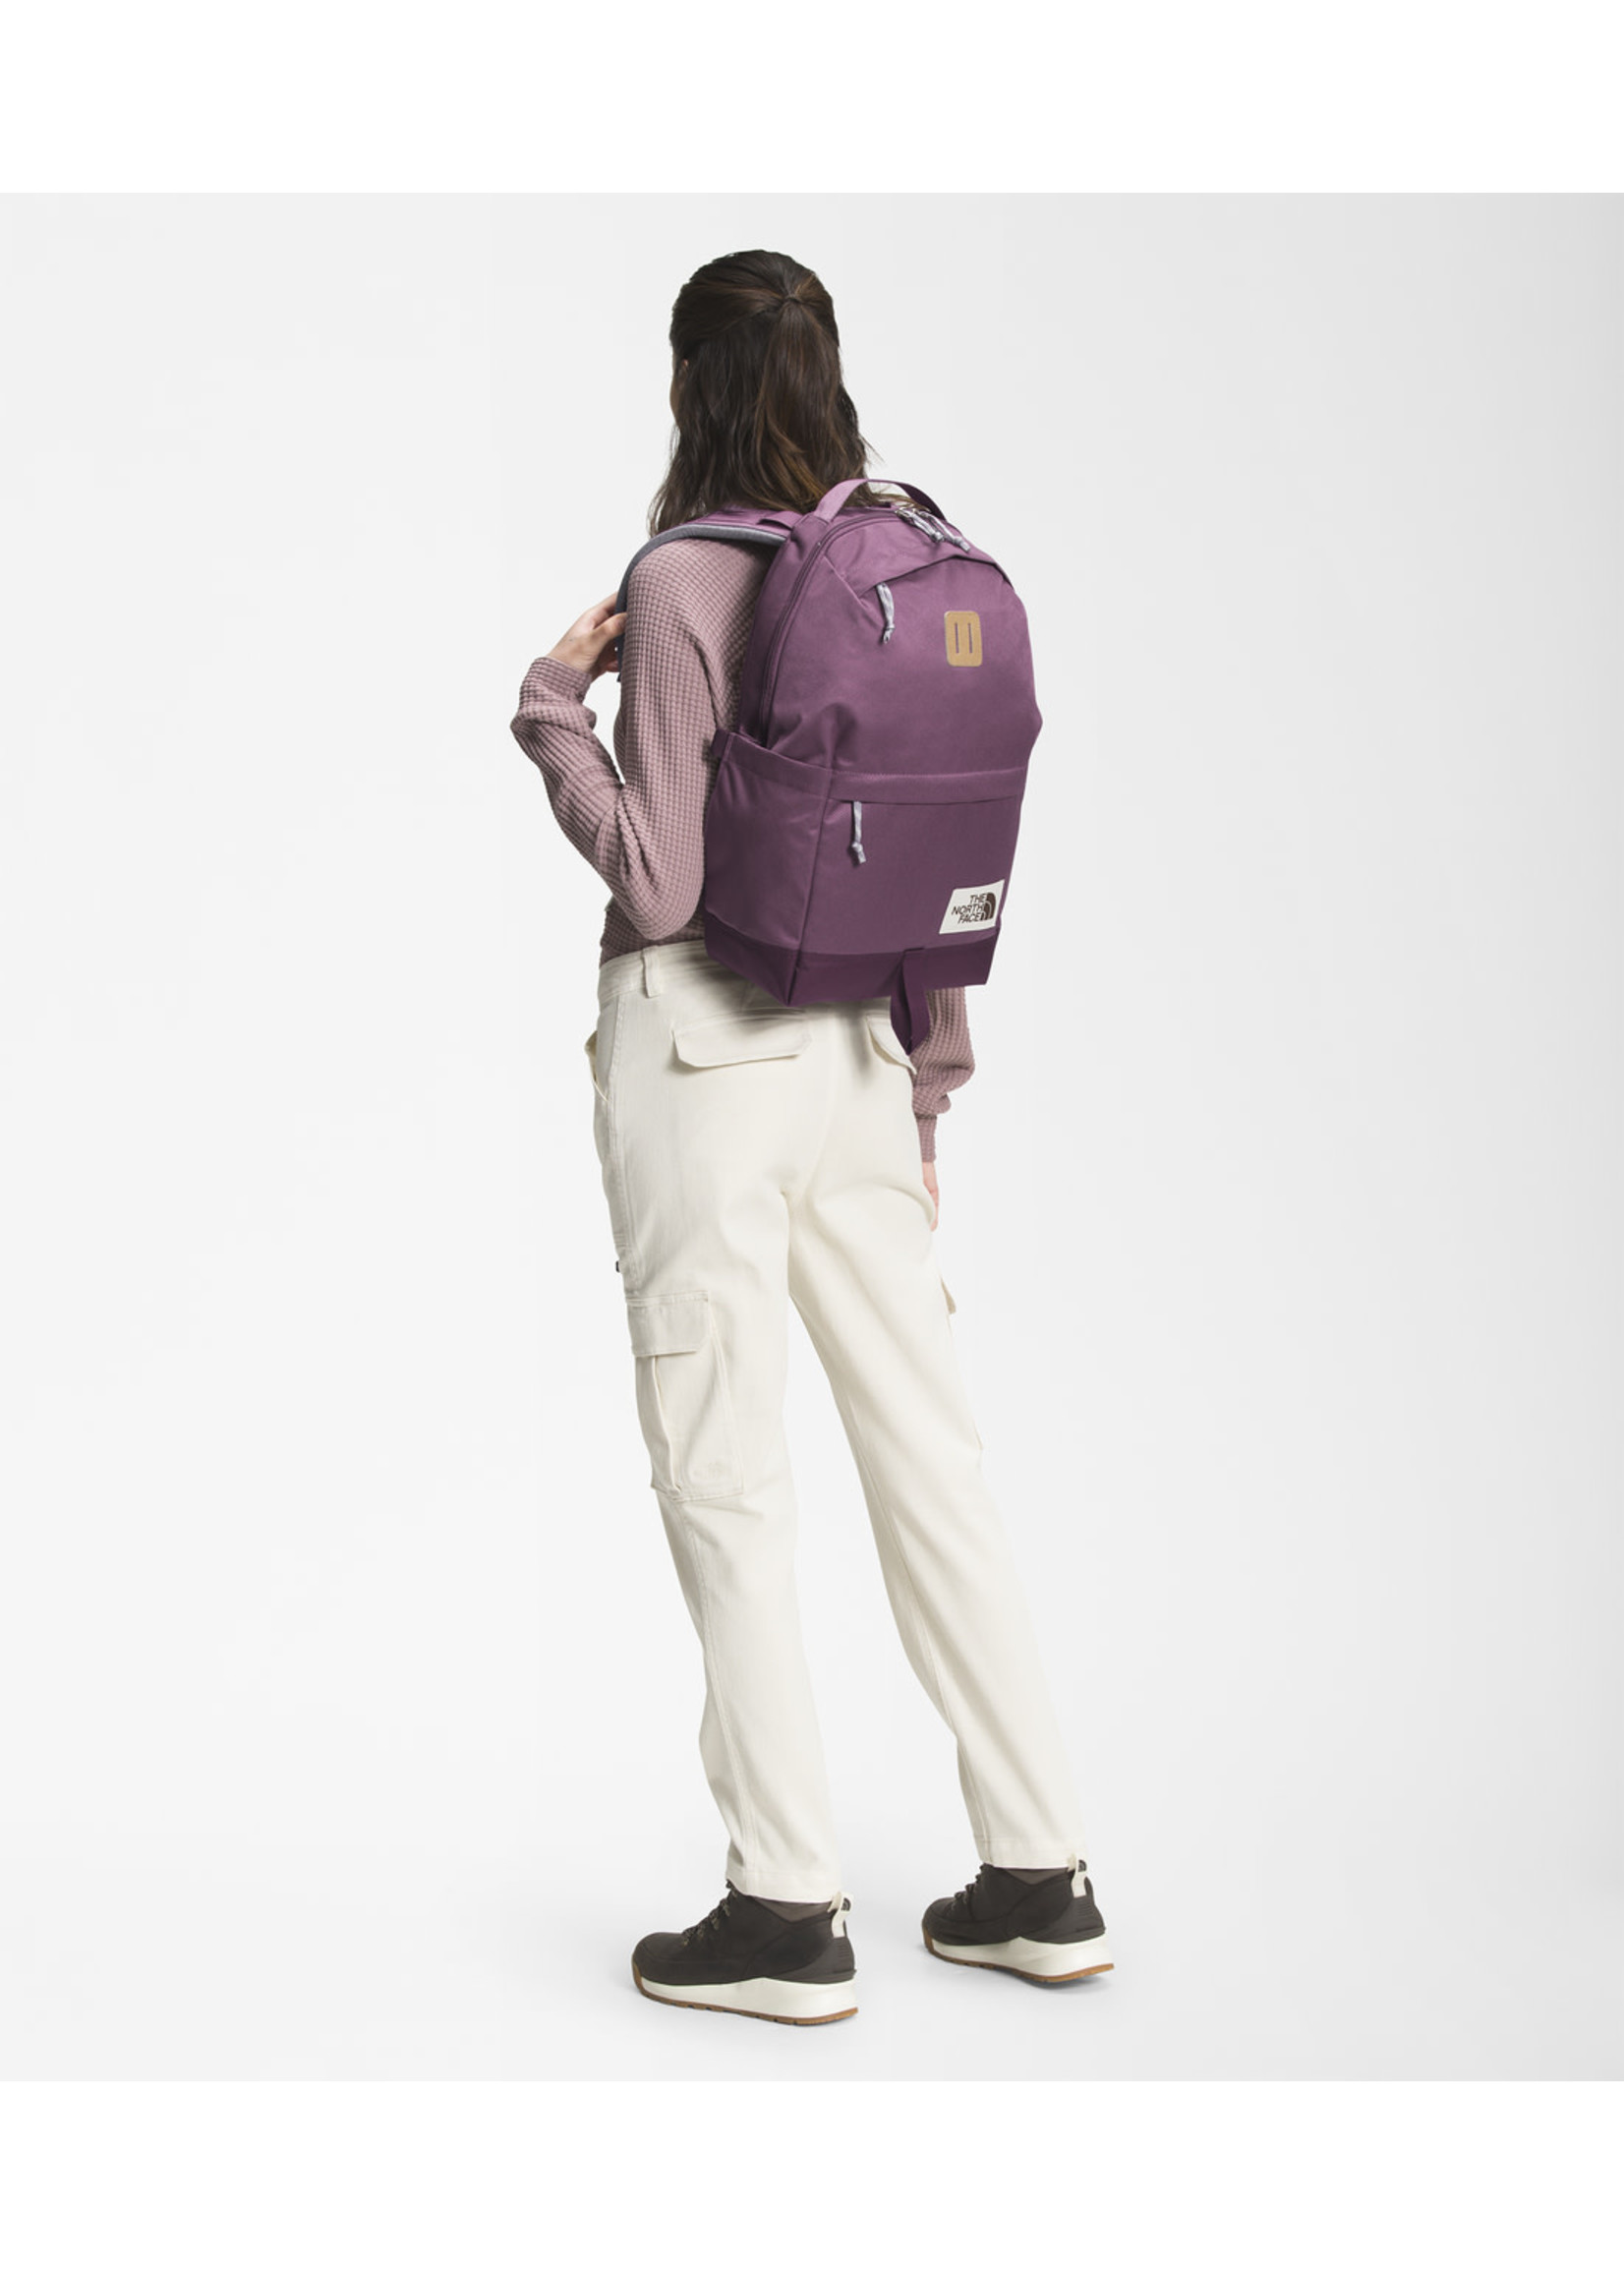 THE NORTH FACE Sac à dos Daypack